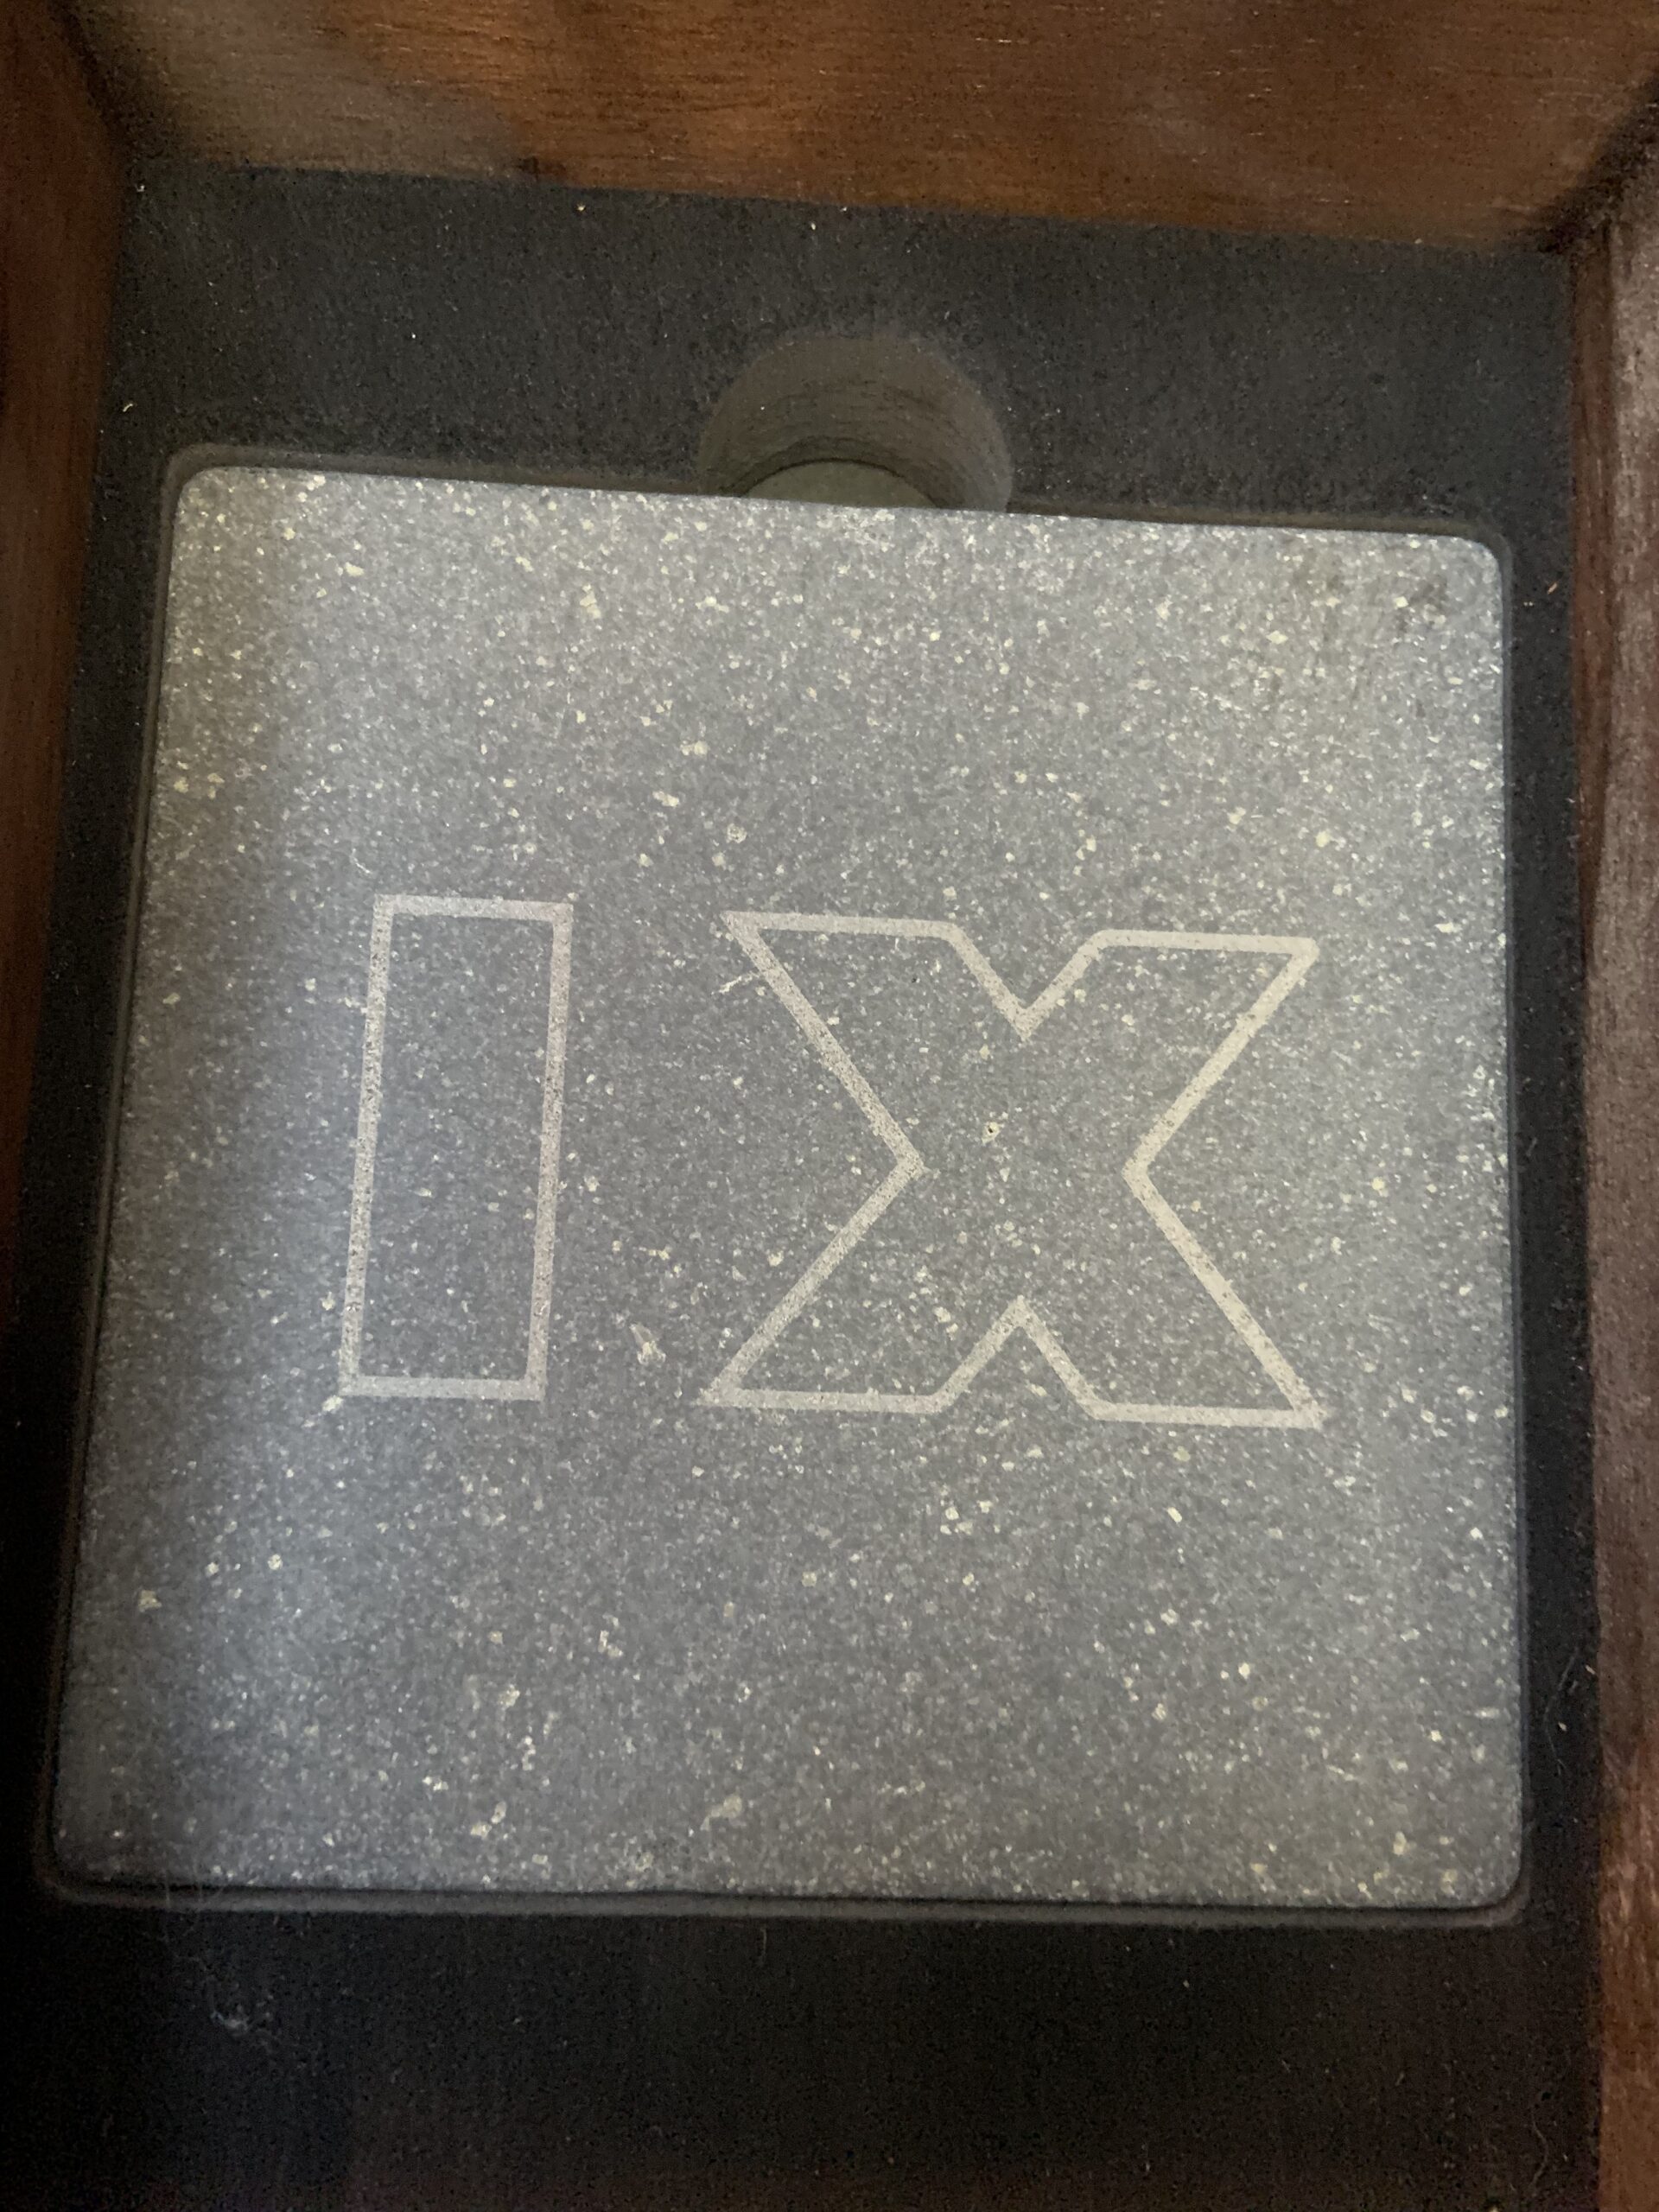 Stone Coaster from the 2019 Lucasfilm Crew Gift.